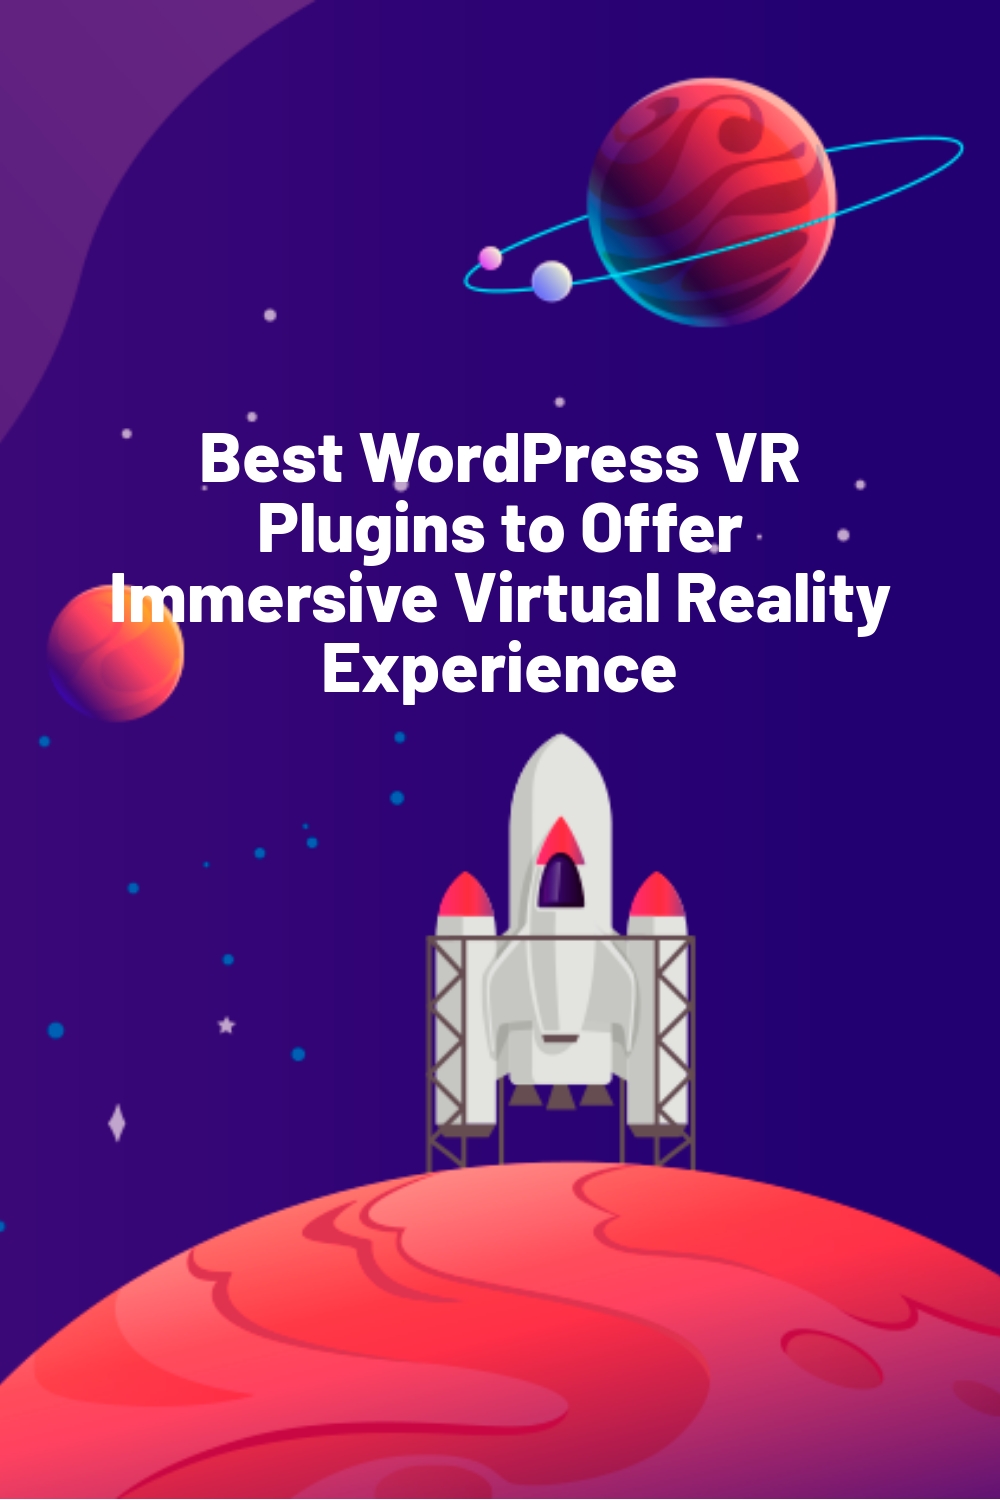 Best WordPress VR Plugins to Offer Immersive Virtual Reality Experience